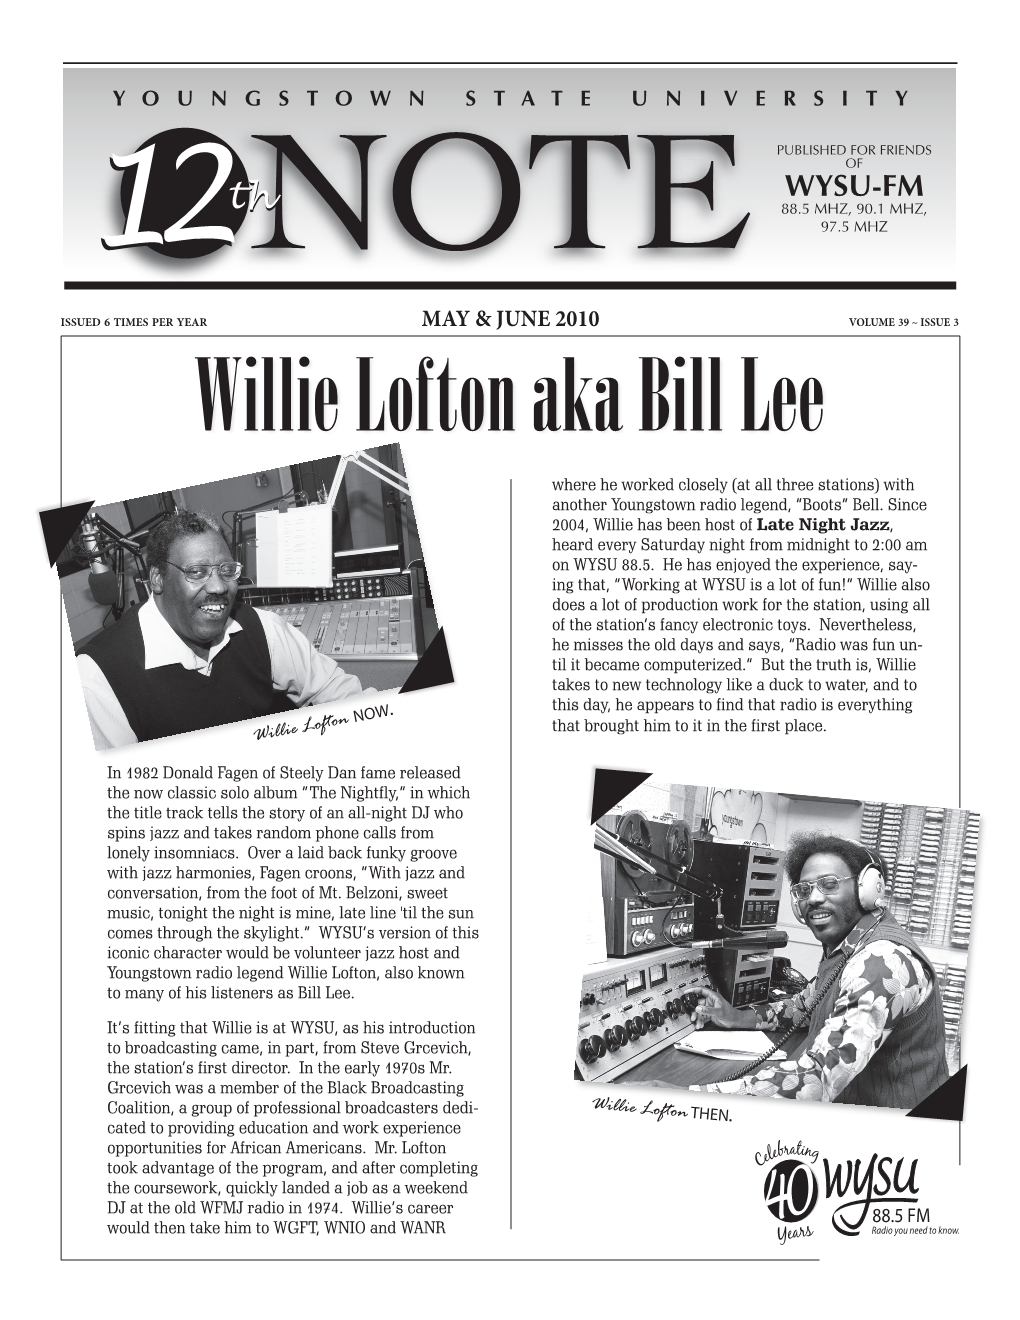 Willie Lofton Aka Bill Lee Y Where He Worked Closely (At All Three Stations) with Another Youngstown Radio Legend, “Boots” Bell